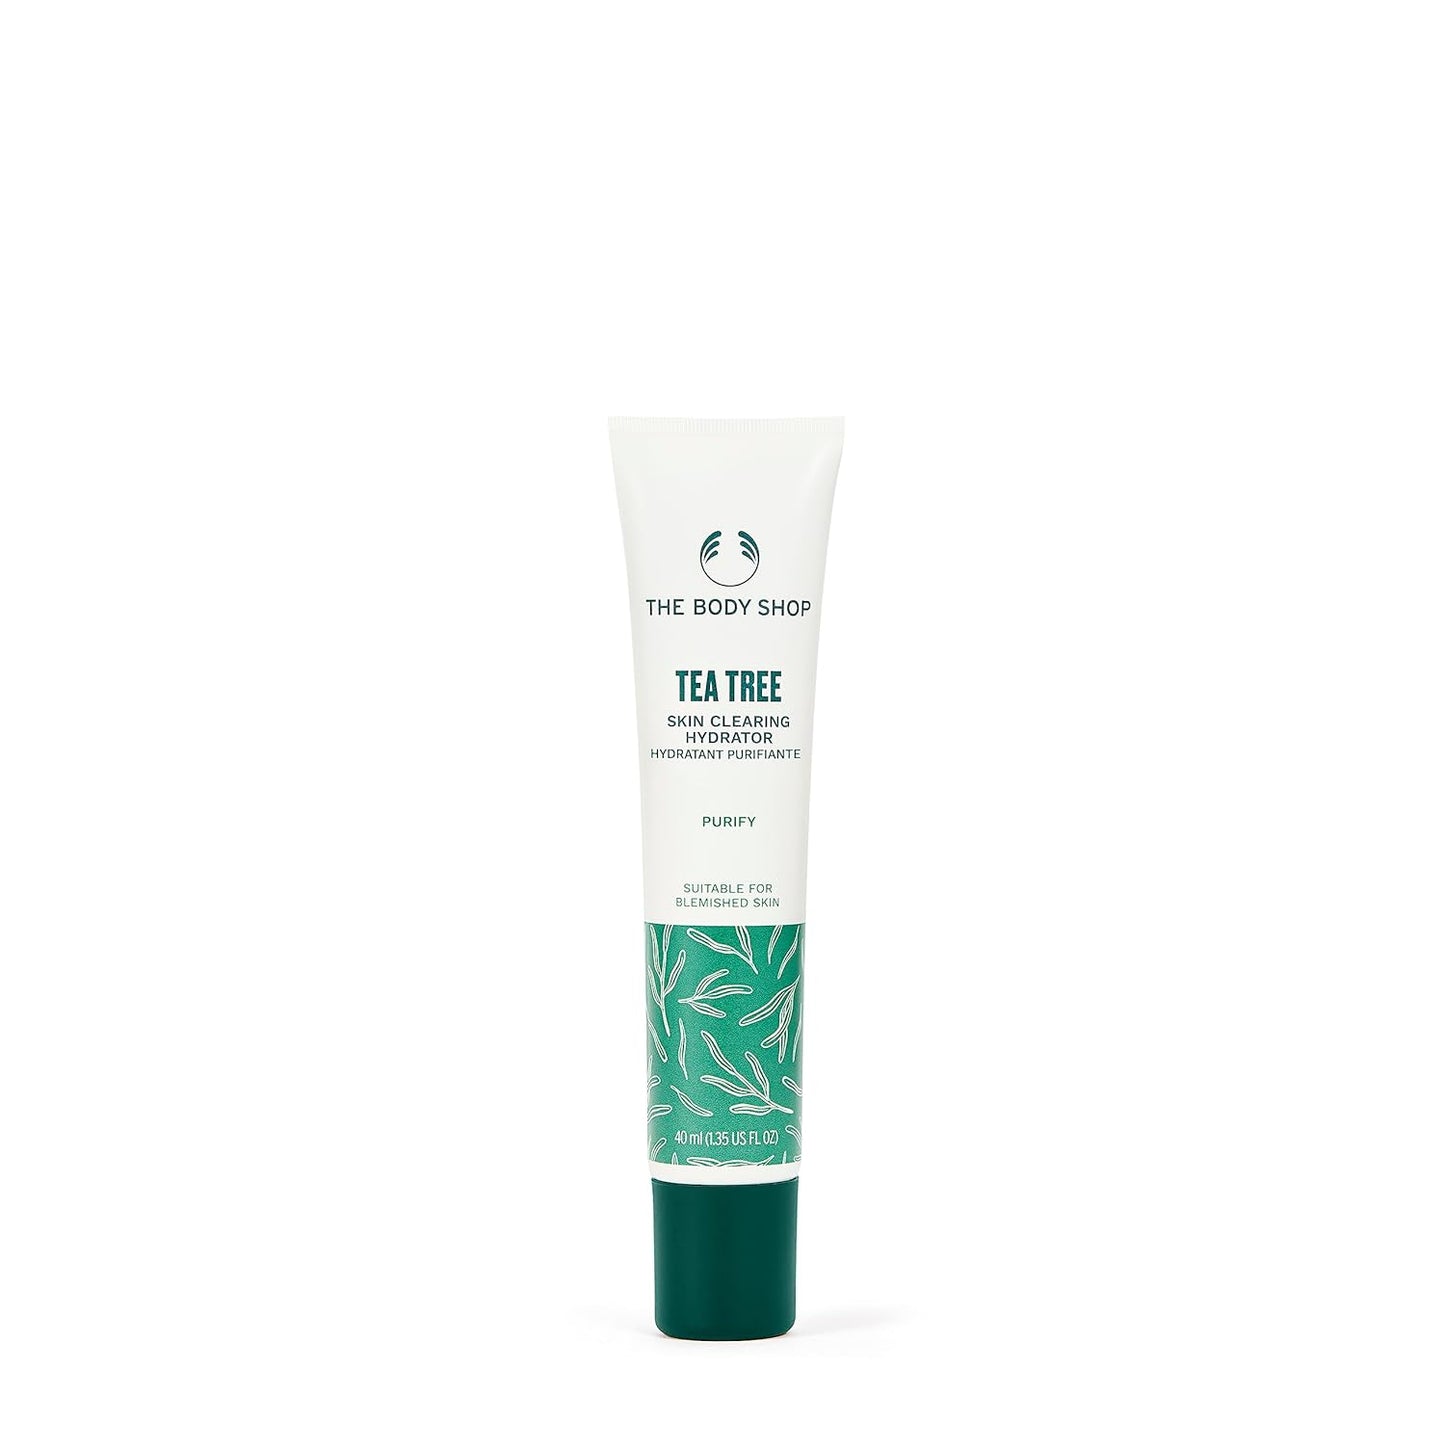 The Body Shop Tea Tree In-Control Hydrator, For Oily, Blemished Skin, Vegan, 1.35 Fl Oz